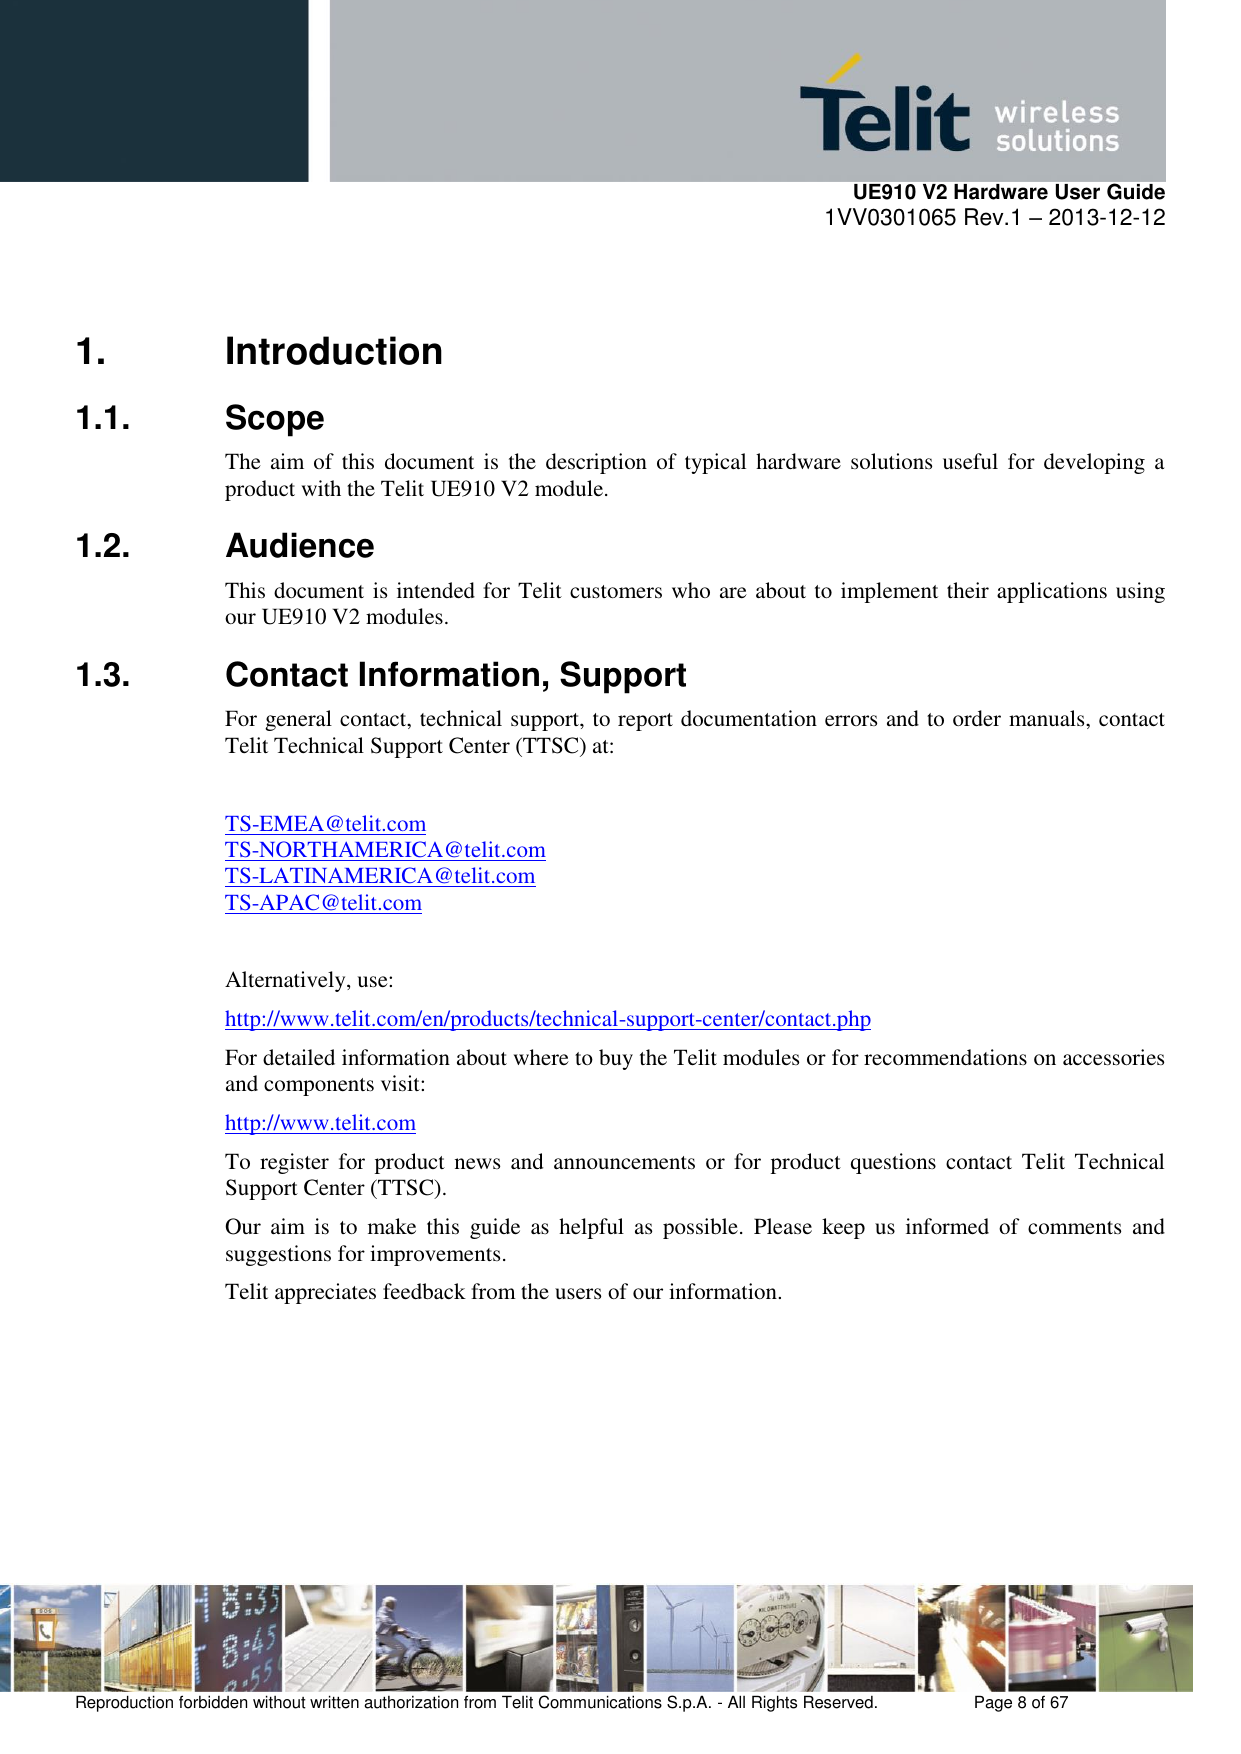     UE910 V2 Hardware User Guide 1VV0301065 Rev.1 – 2013-12-12  Reproduction forbidden without written authorization from Telit Communications S.p.A. - All Rights Reserved.    Page 8 of 67                                                     1.  Introduction 1.1.  Scope The aim  of  this  document  is  the  description of typical  hardware solutions  useful for  developing  a product with the Telit UE910 V2 module.  1.2.  Audience This document is intended for Telit customers who are about to implement their applications using our UE910 V2 modules. 1.3.  Contact Information, Support For general contact, technical support, to report documentation errors and to order manuals, contact Telit Technical Support Center (TTSC) at:  TS-EMEA@telit.com TS-NORTHAMERICA@telit.com TS-LATINAMERICA@telit.com TS-APAC@telit.com  Alternatively, use:  http://www.telit.com/en/products/technical-support-center/contact.php For detailed information about where to buy the Telit modules or for recommendations on accessories and components visit:  http://www.telit.com To  register  for  product news  and  announcements or  for  product  questions  contact Telit  Technical Support Center (TTSC). Our  aim  is  to  make  this  guide  as  helpful  as  possible.  Please  keep  us  informed  of  comments  and suggestions for improvements. Telit appreciates feedback from the users of our information.      